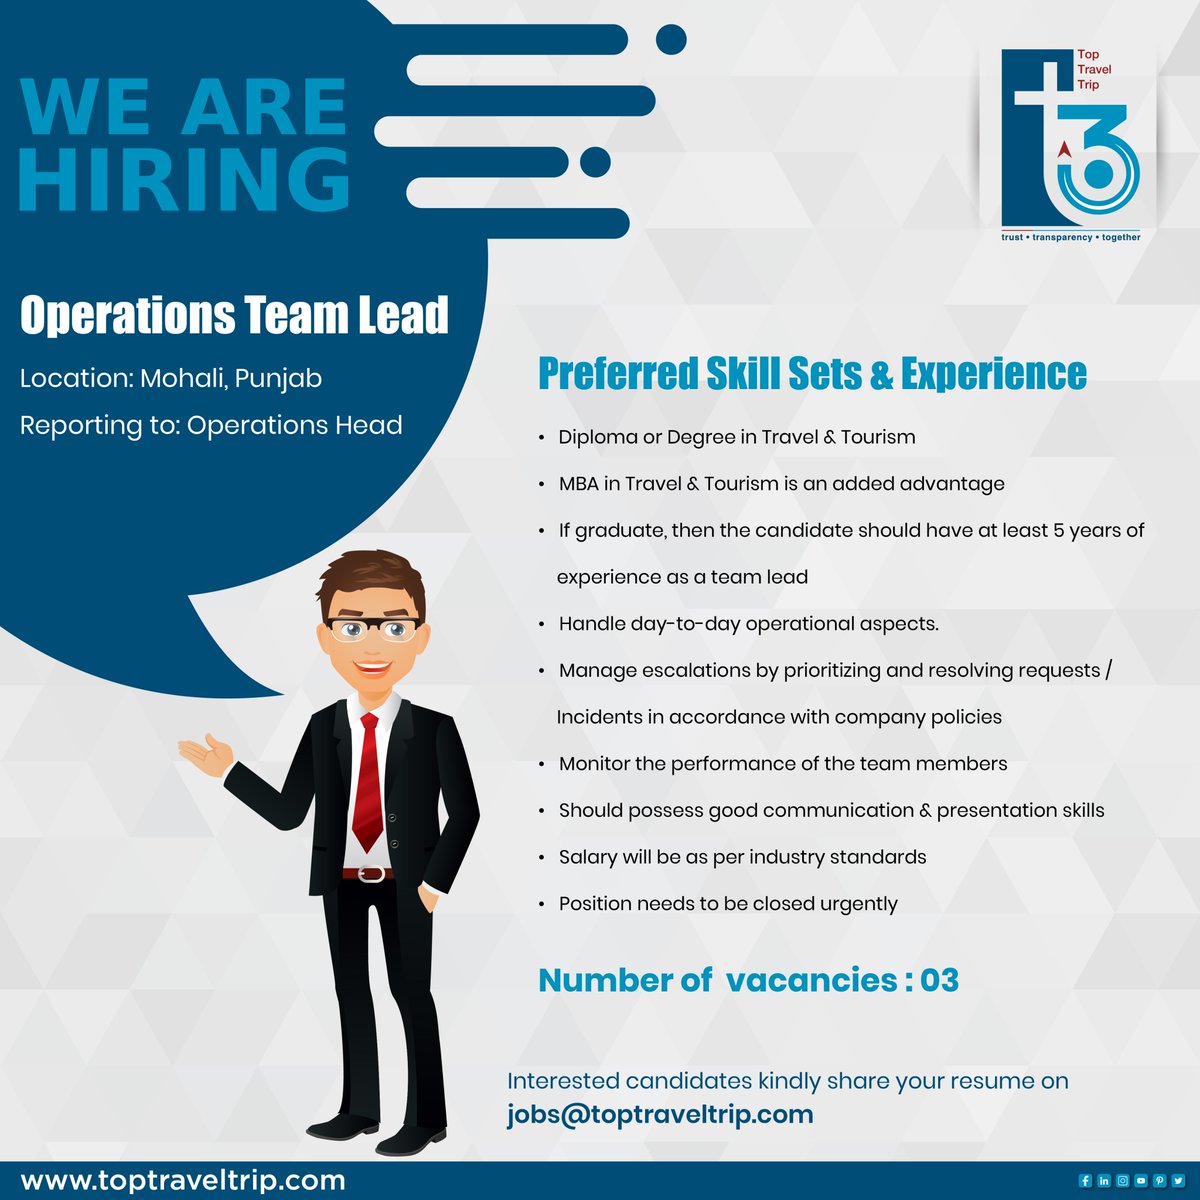 T3 is #Hiring!  
#ApplyNow today for the post of Operations Team Lead at jobs@toptraveltrip.com

#t3 #toptraveltrip #t3team #urgentrequirement #operationteamlead #operations #t3jobs #jobs #travelandtourism #travel #tourism #t3workculture #Mohali #mohalijobs #hiring #mohalinews